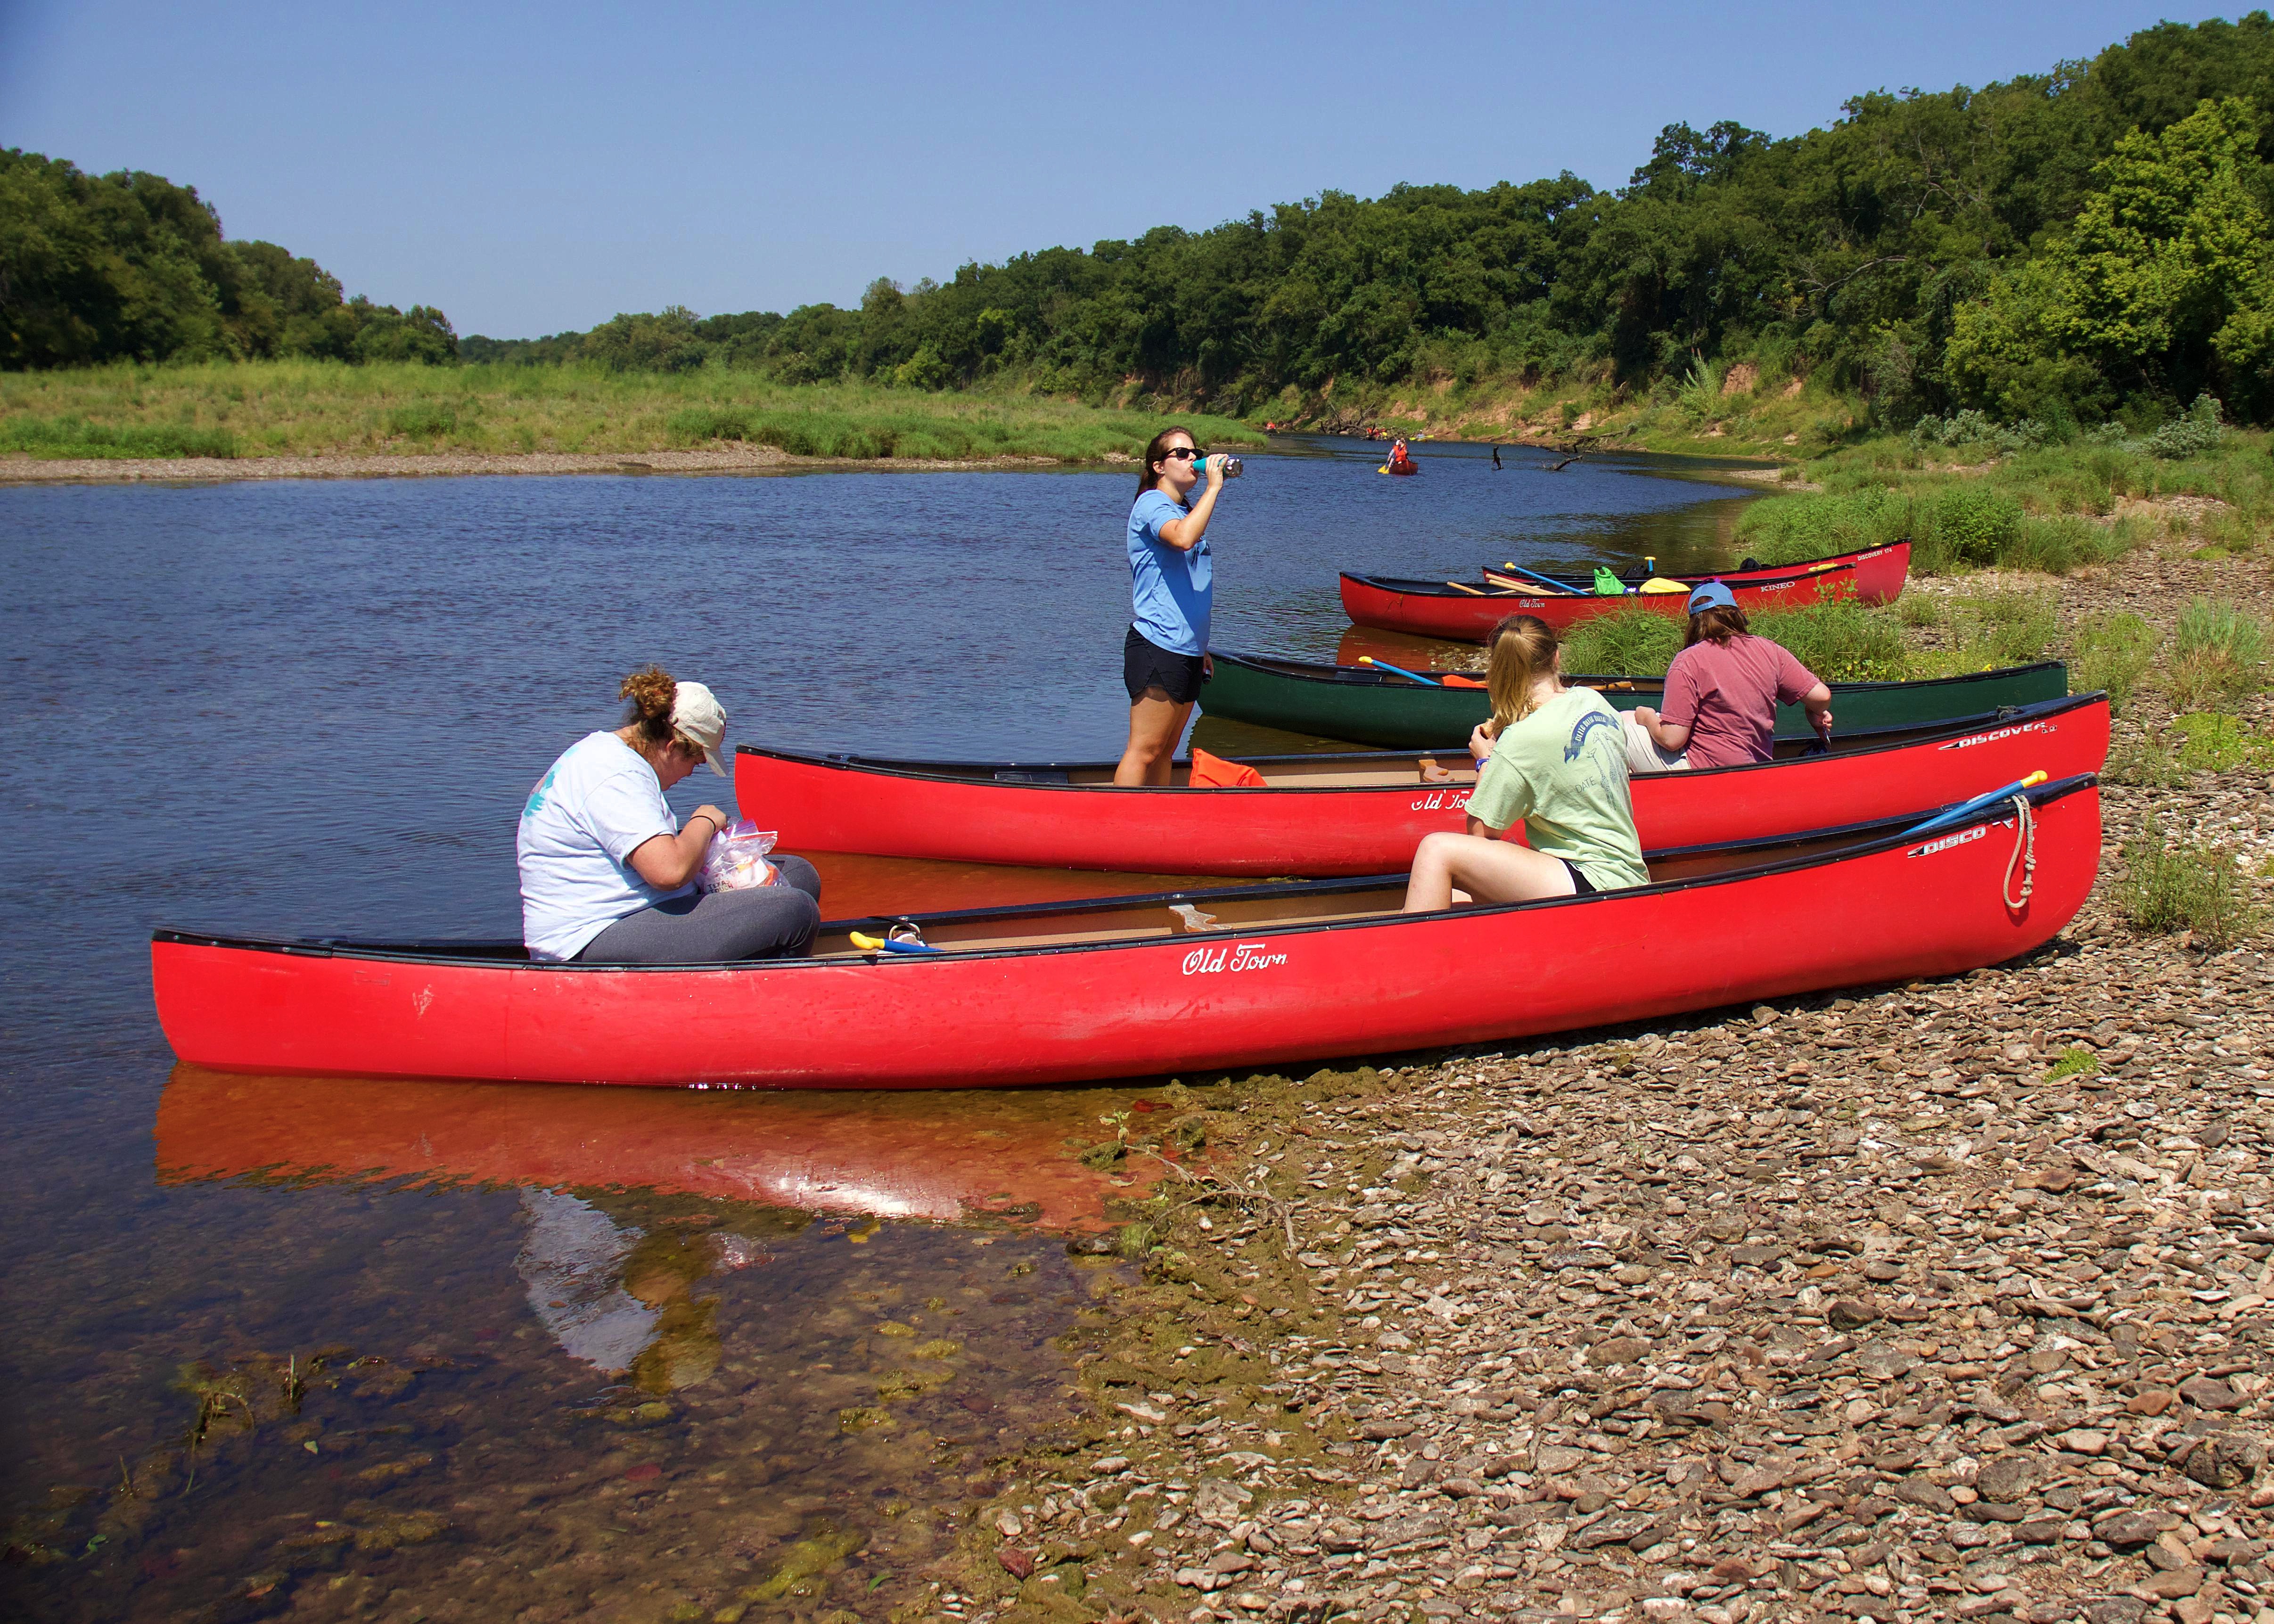 Students take a break during the eight-mile river canoe trip.